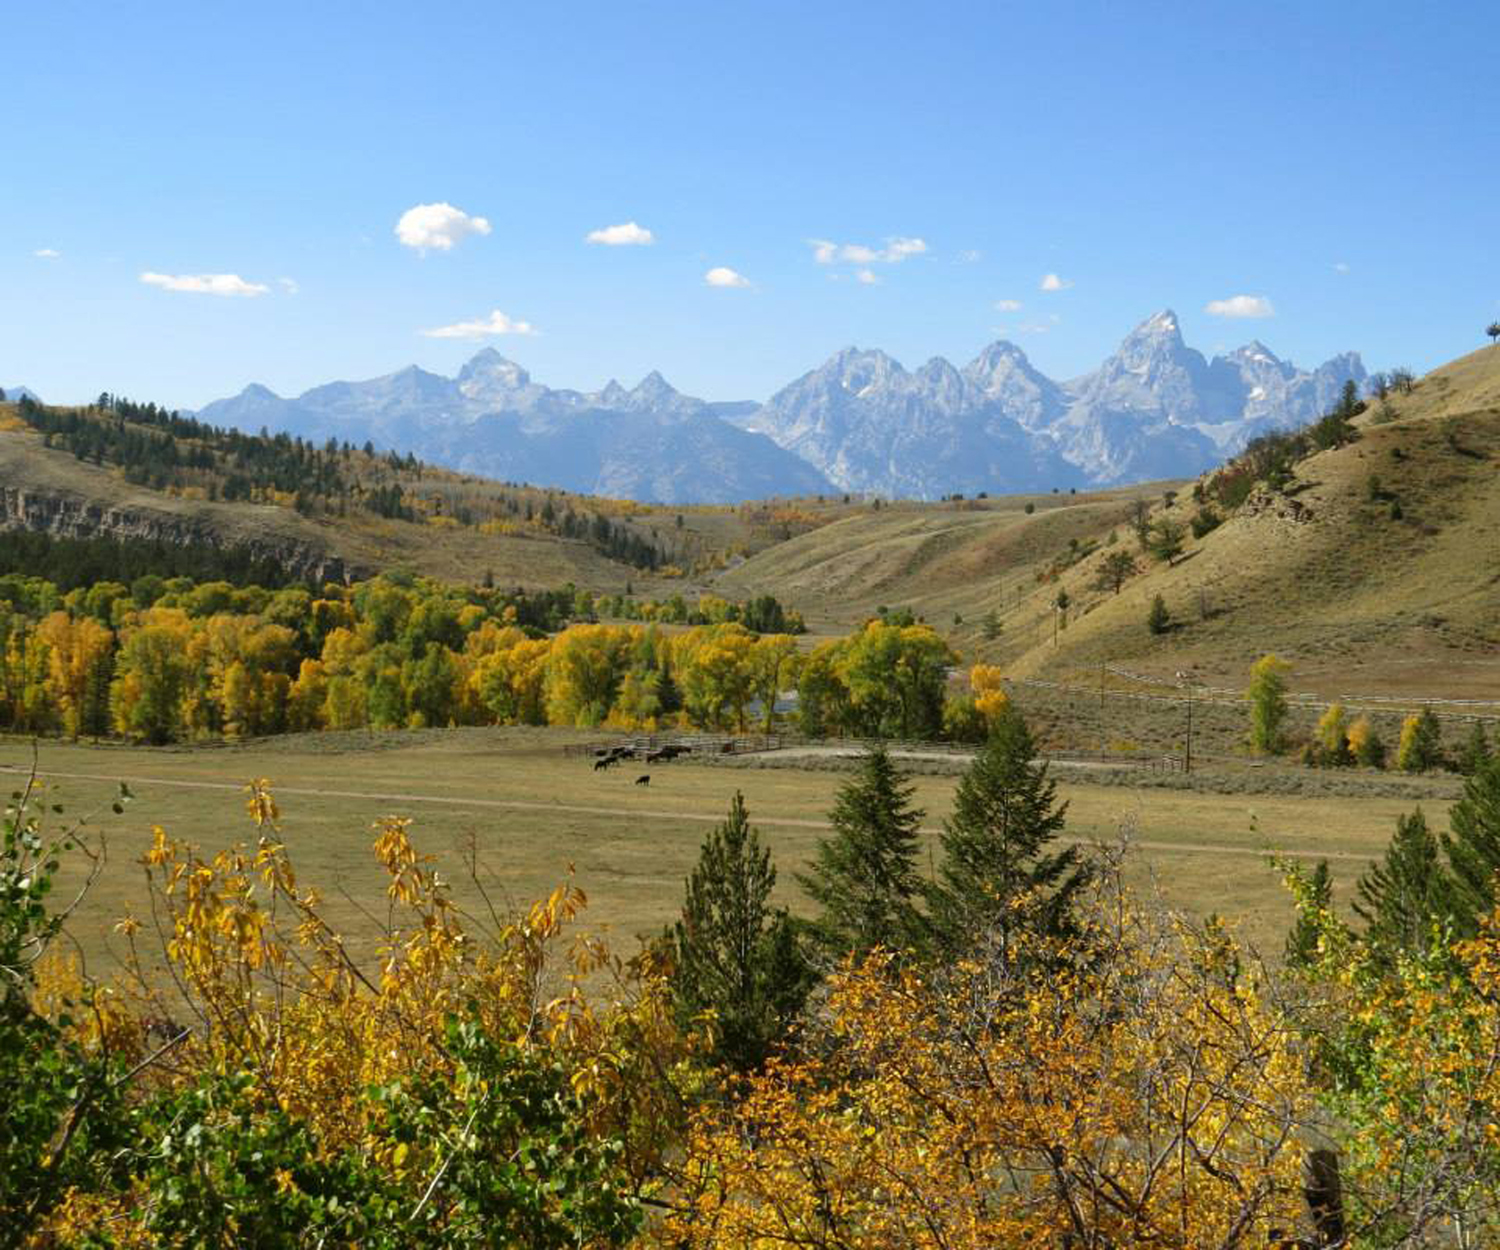 September in Jackson is an inspiring time with long days and comfortable climates for visitors and art enthusiasts to enjoy the many outdoor activities of the Jackson Hole Fall Arts Festival.